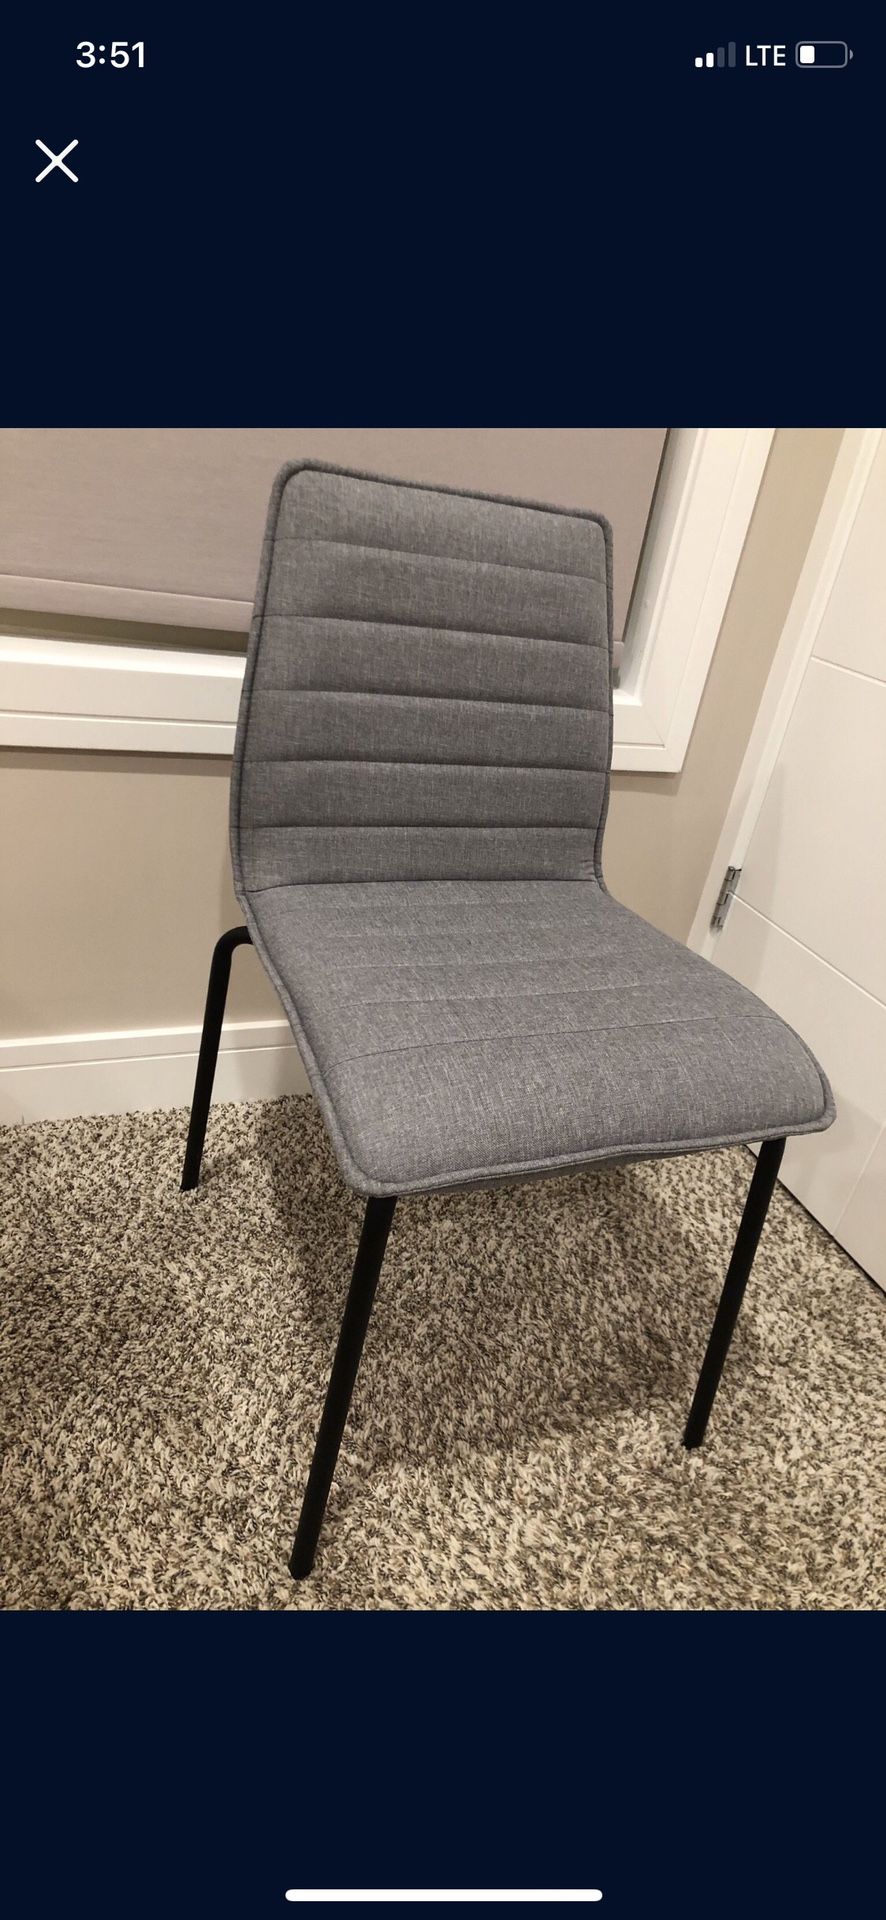 NEW CHAIR